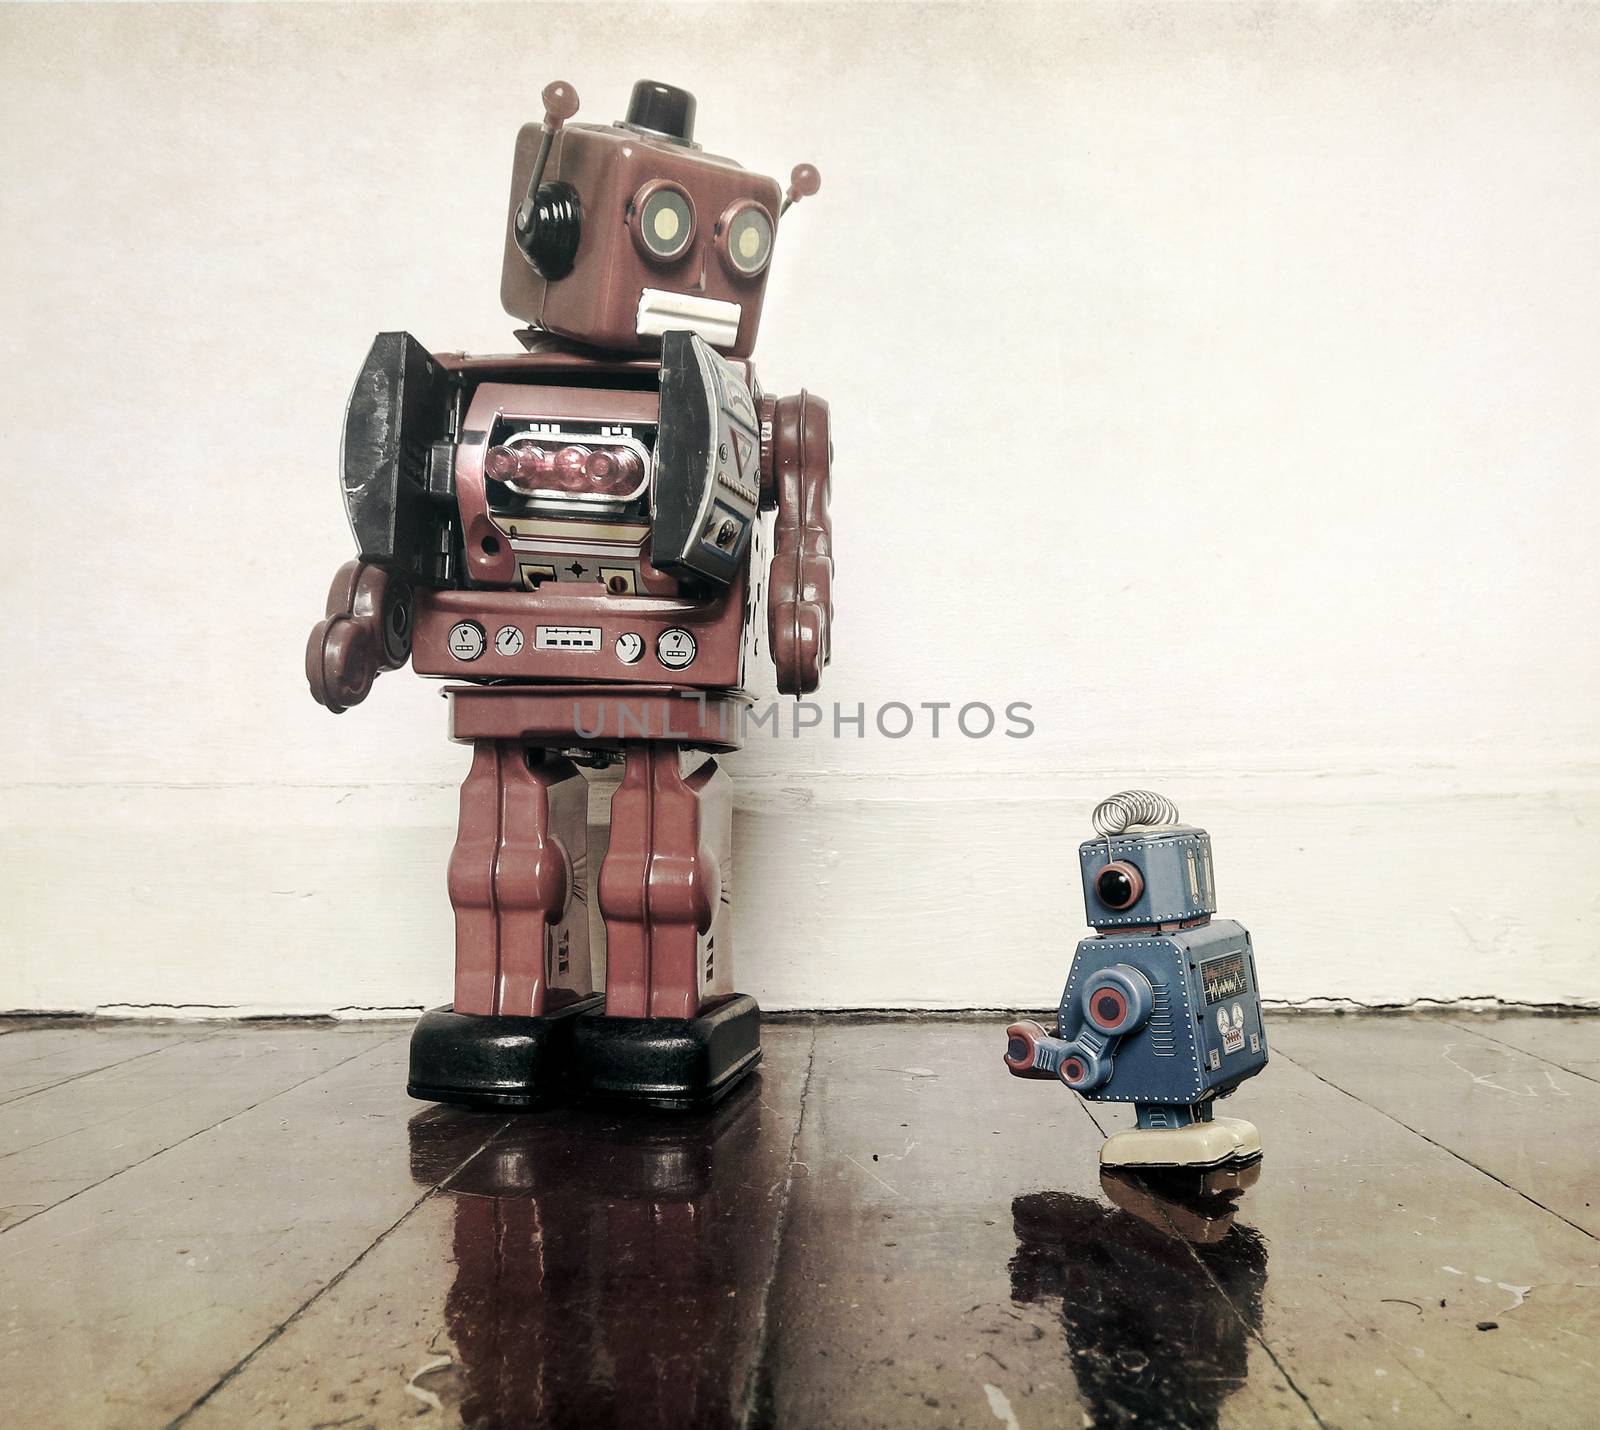 Boss robots looking down on his working robot  on wooden floor with reflection